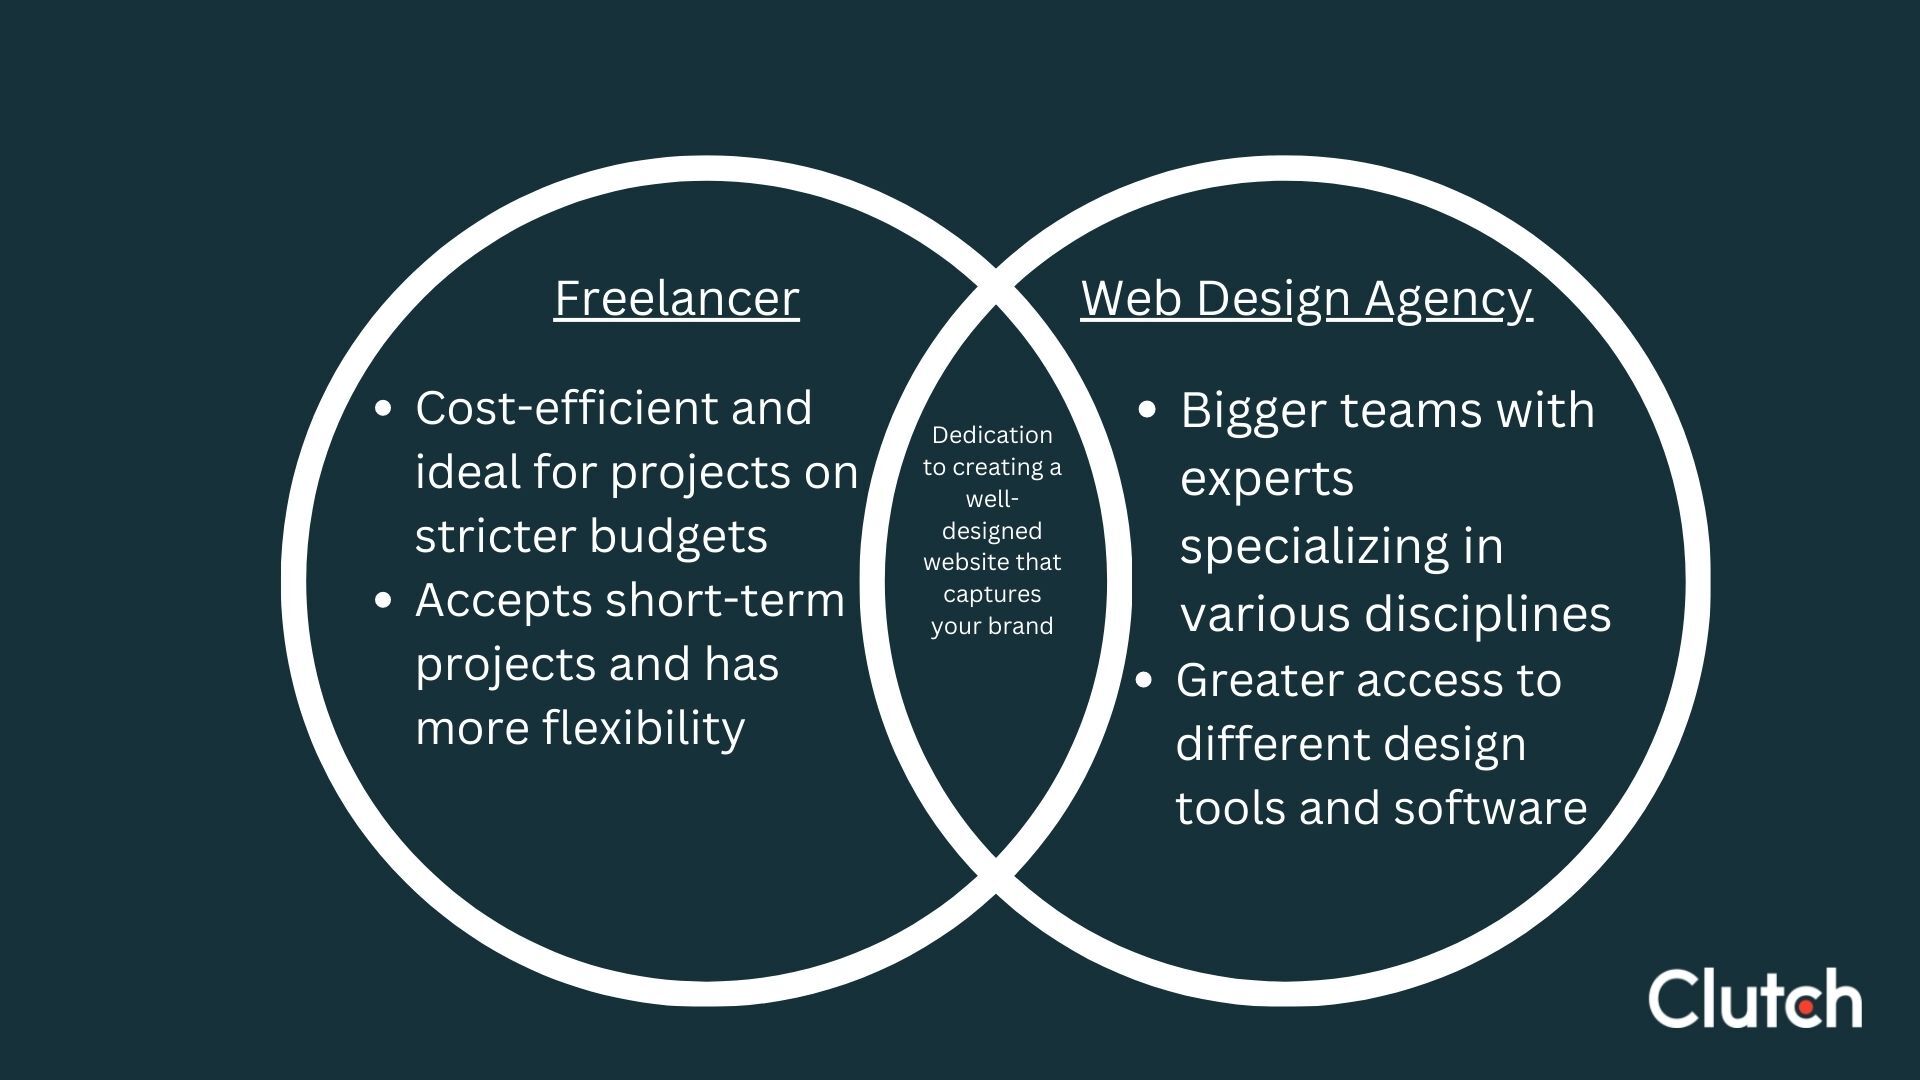 When to Hire a Freelance Web Designer vs. Agency